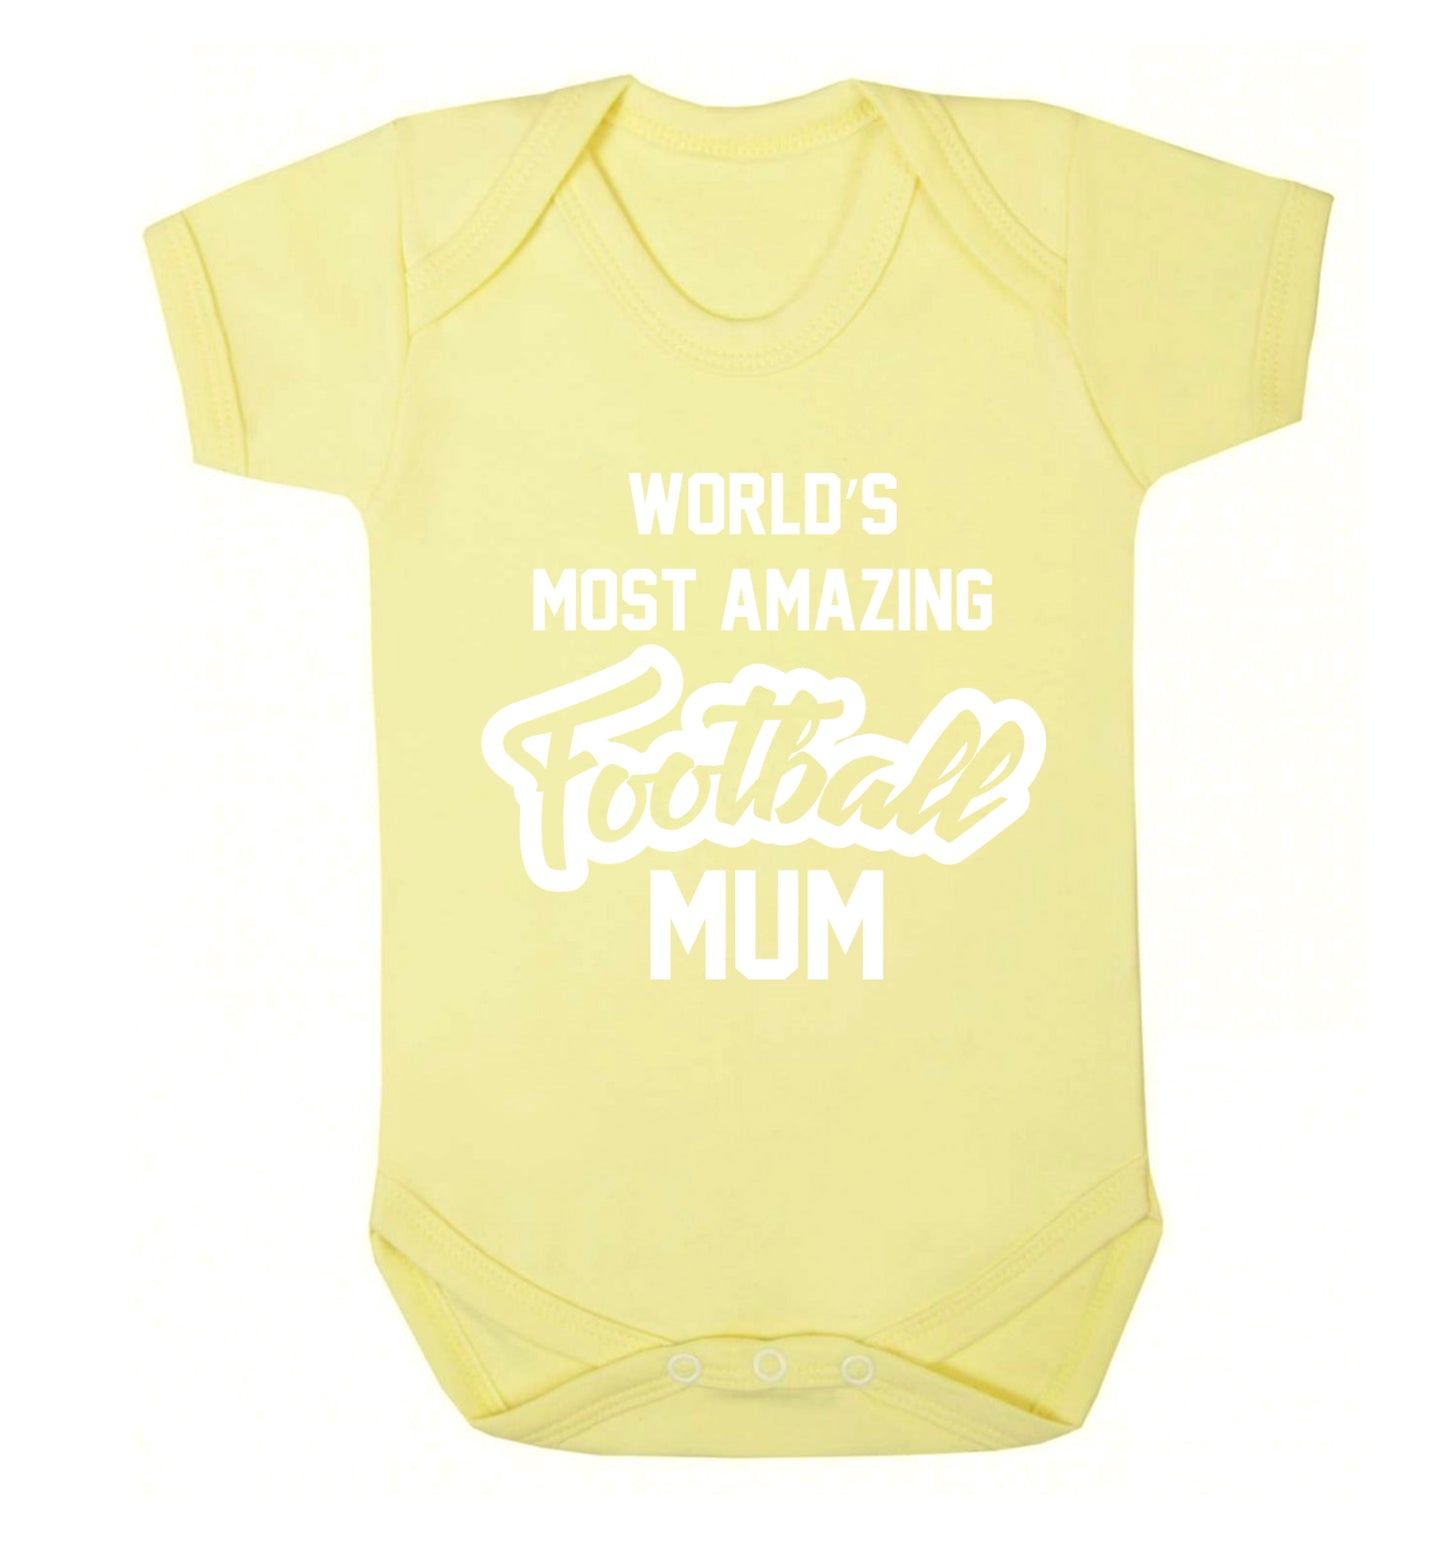 Worlds most amazing football mum Baby Vest pale yellow 18-24 months